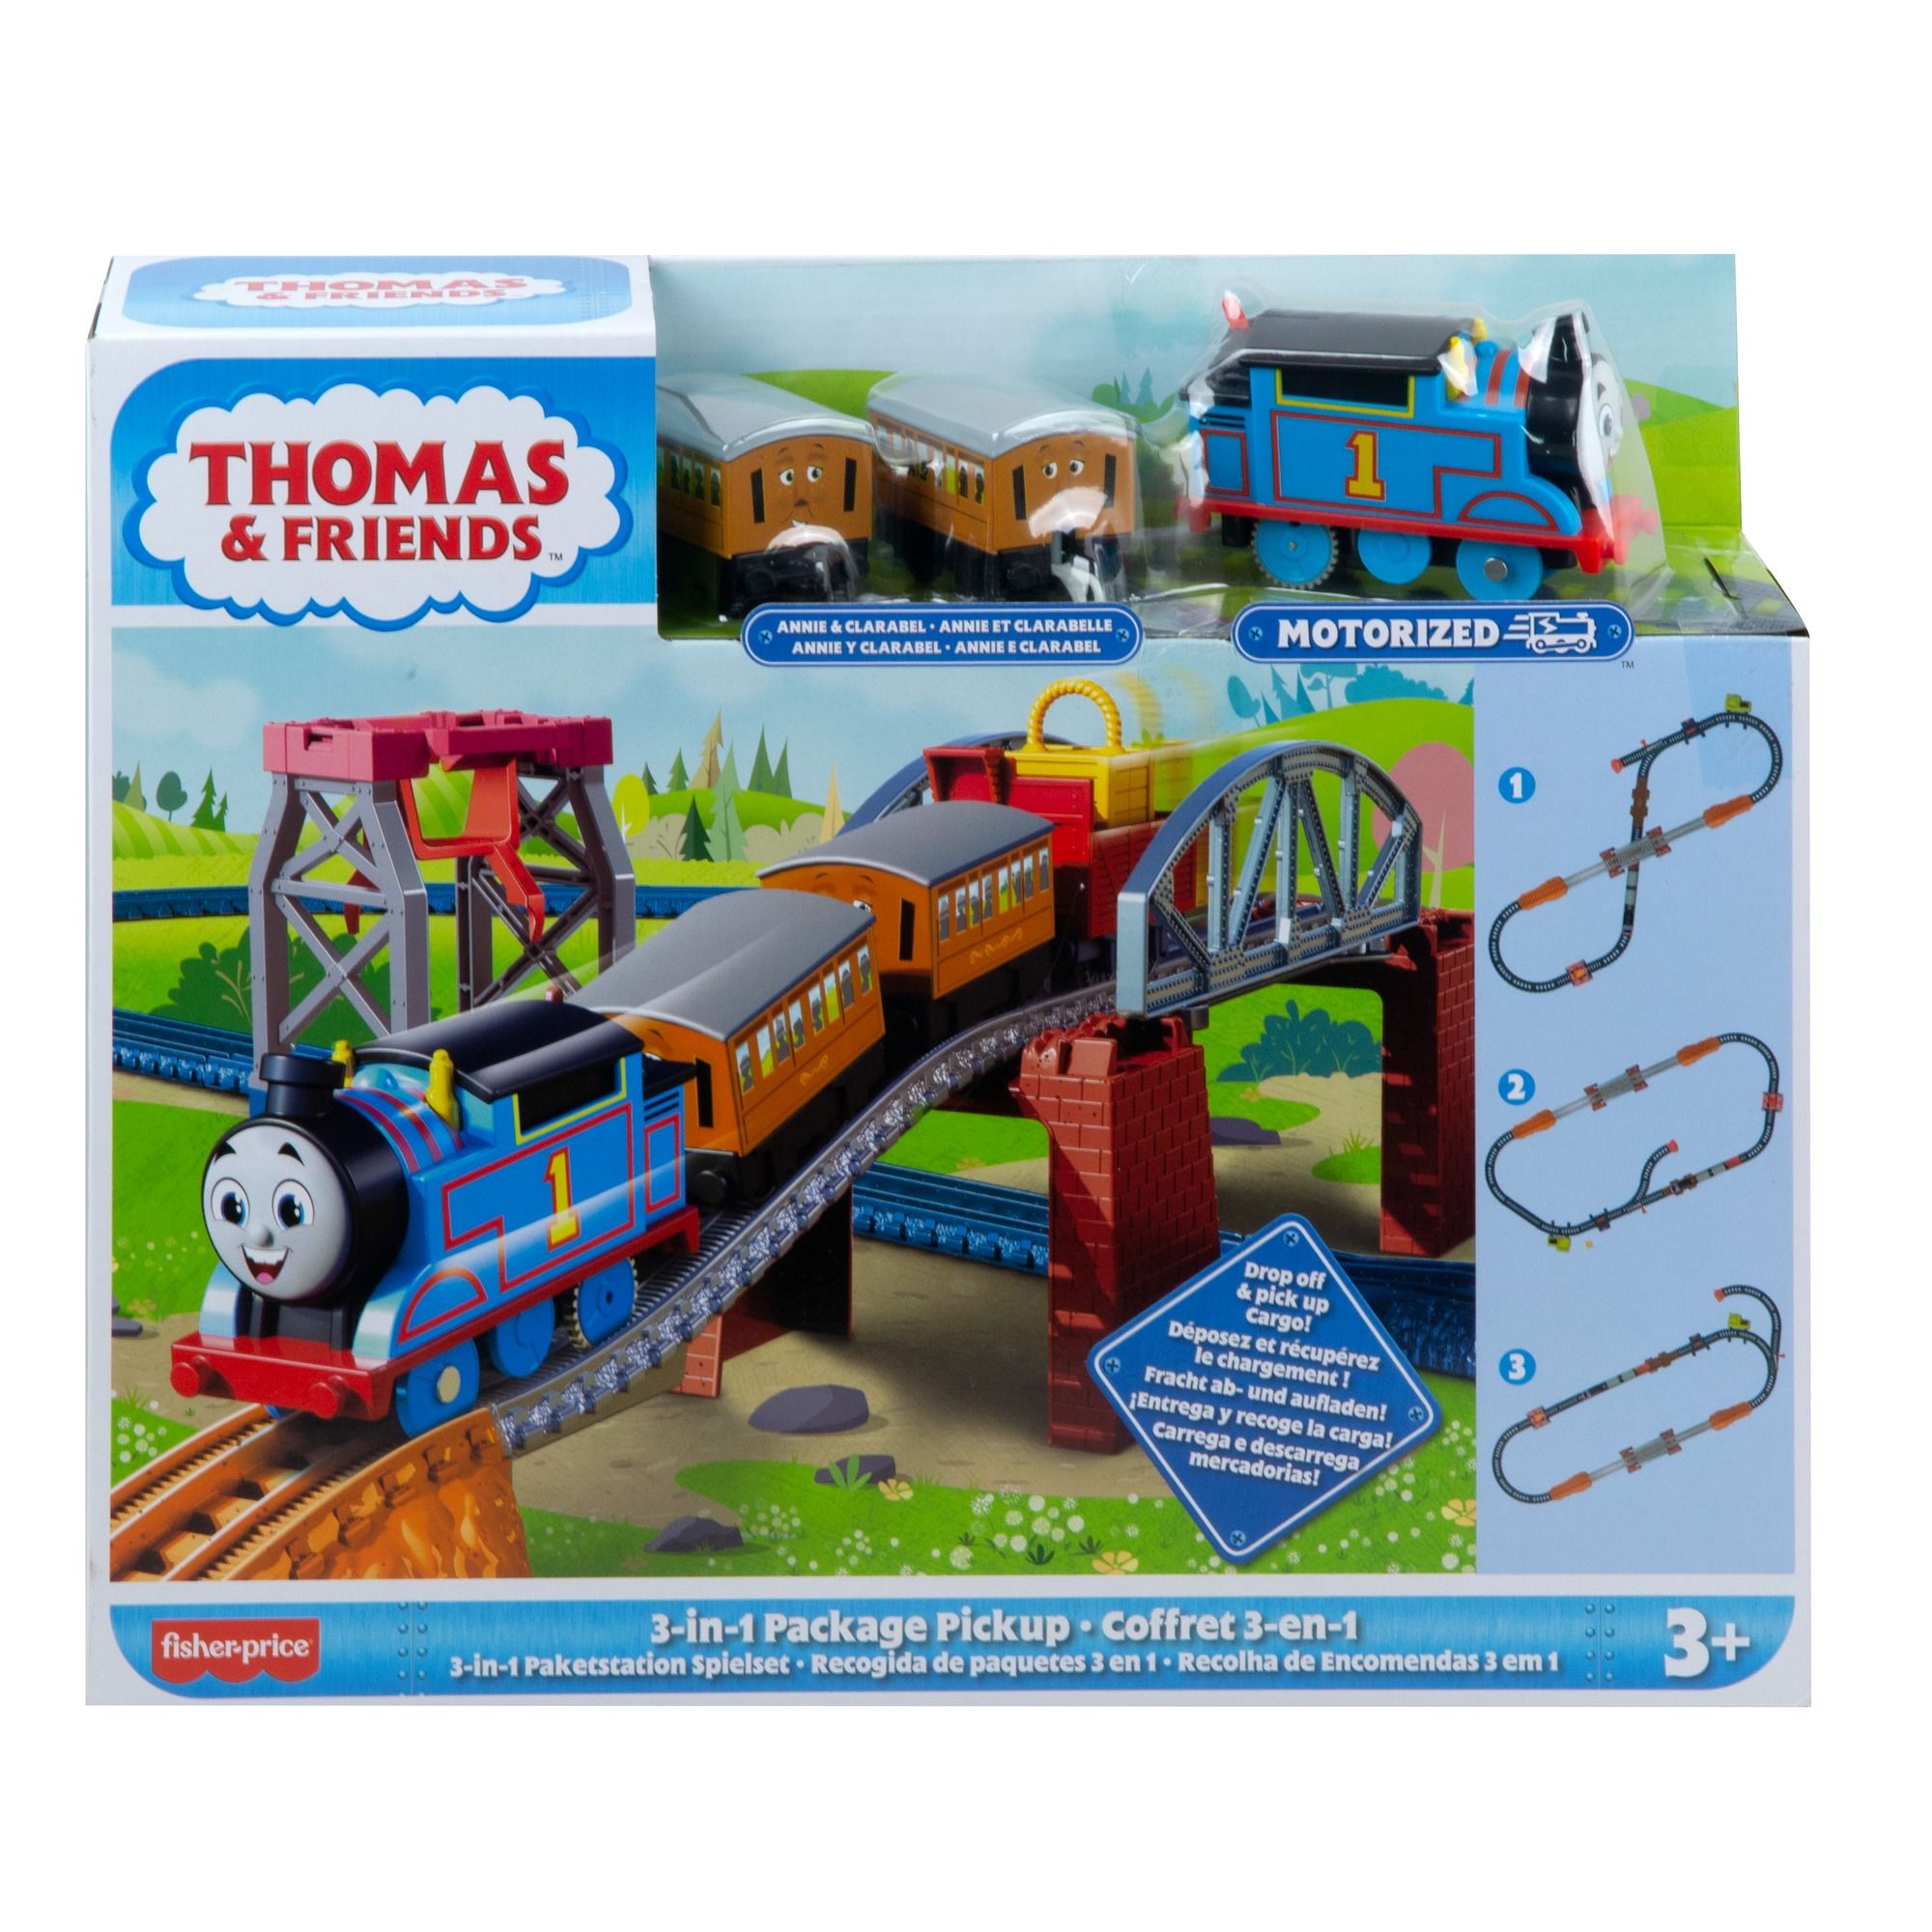 Thomas & Friends 3-in-1 Package Pickup Thomas & Friends